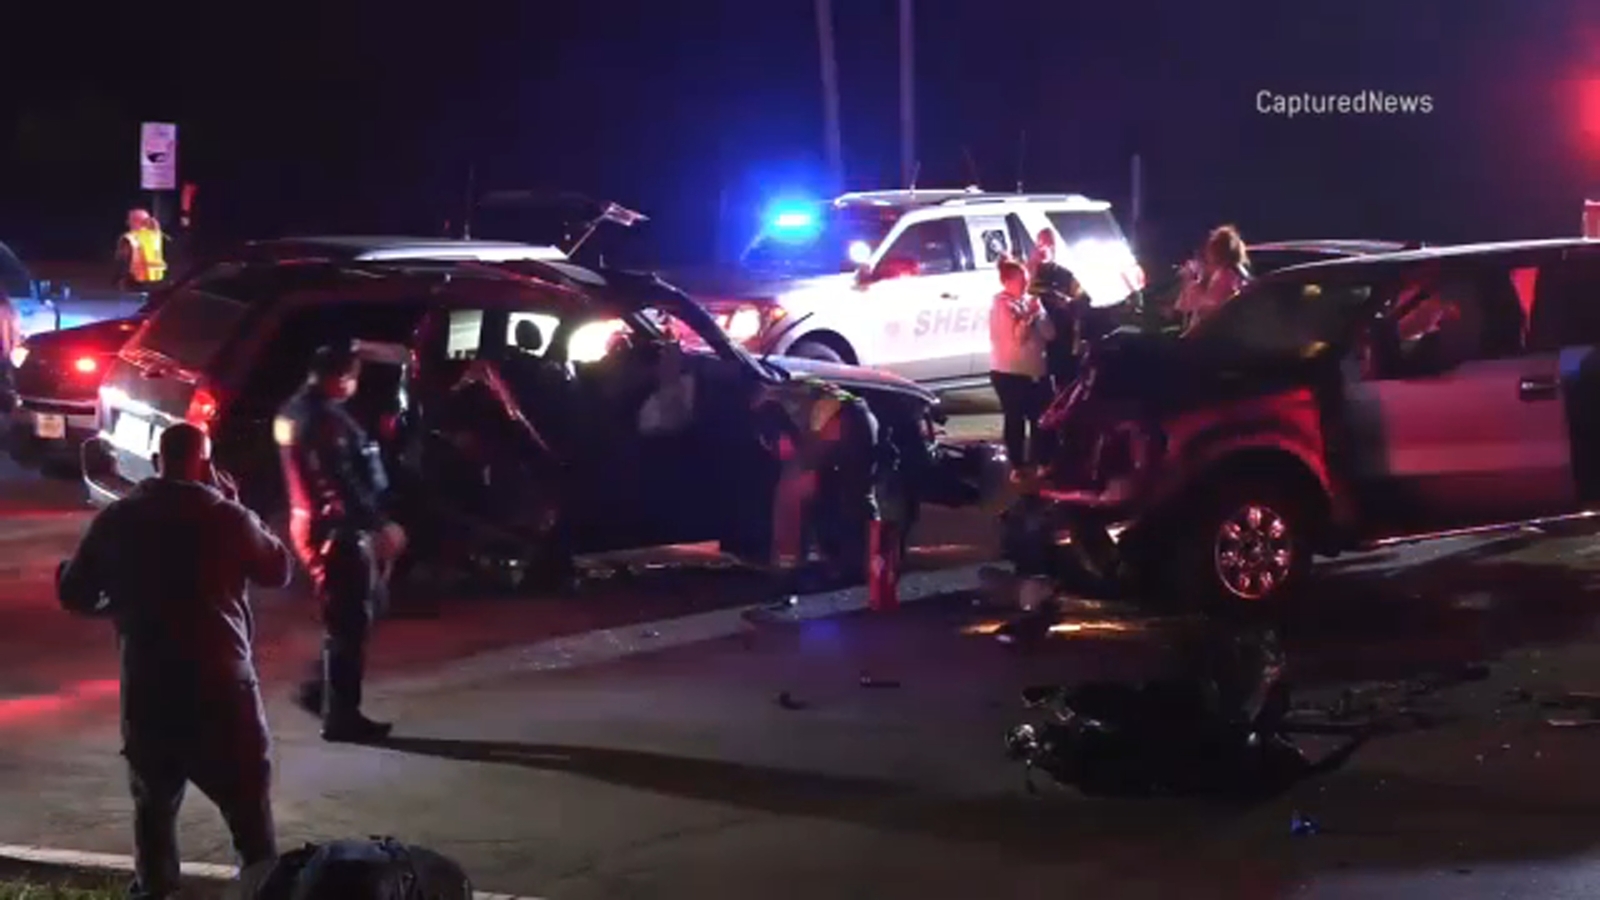  Gurnee crash: At least 4 injured in multi-vehicle collision in north suburbs, sheriff's office says 